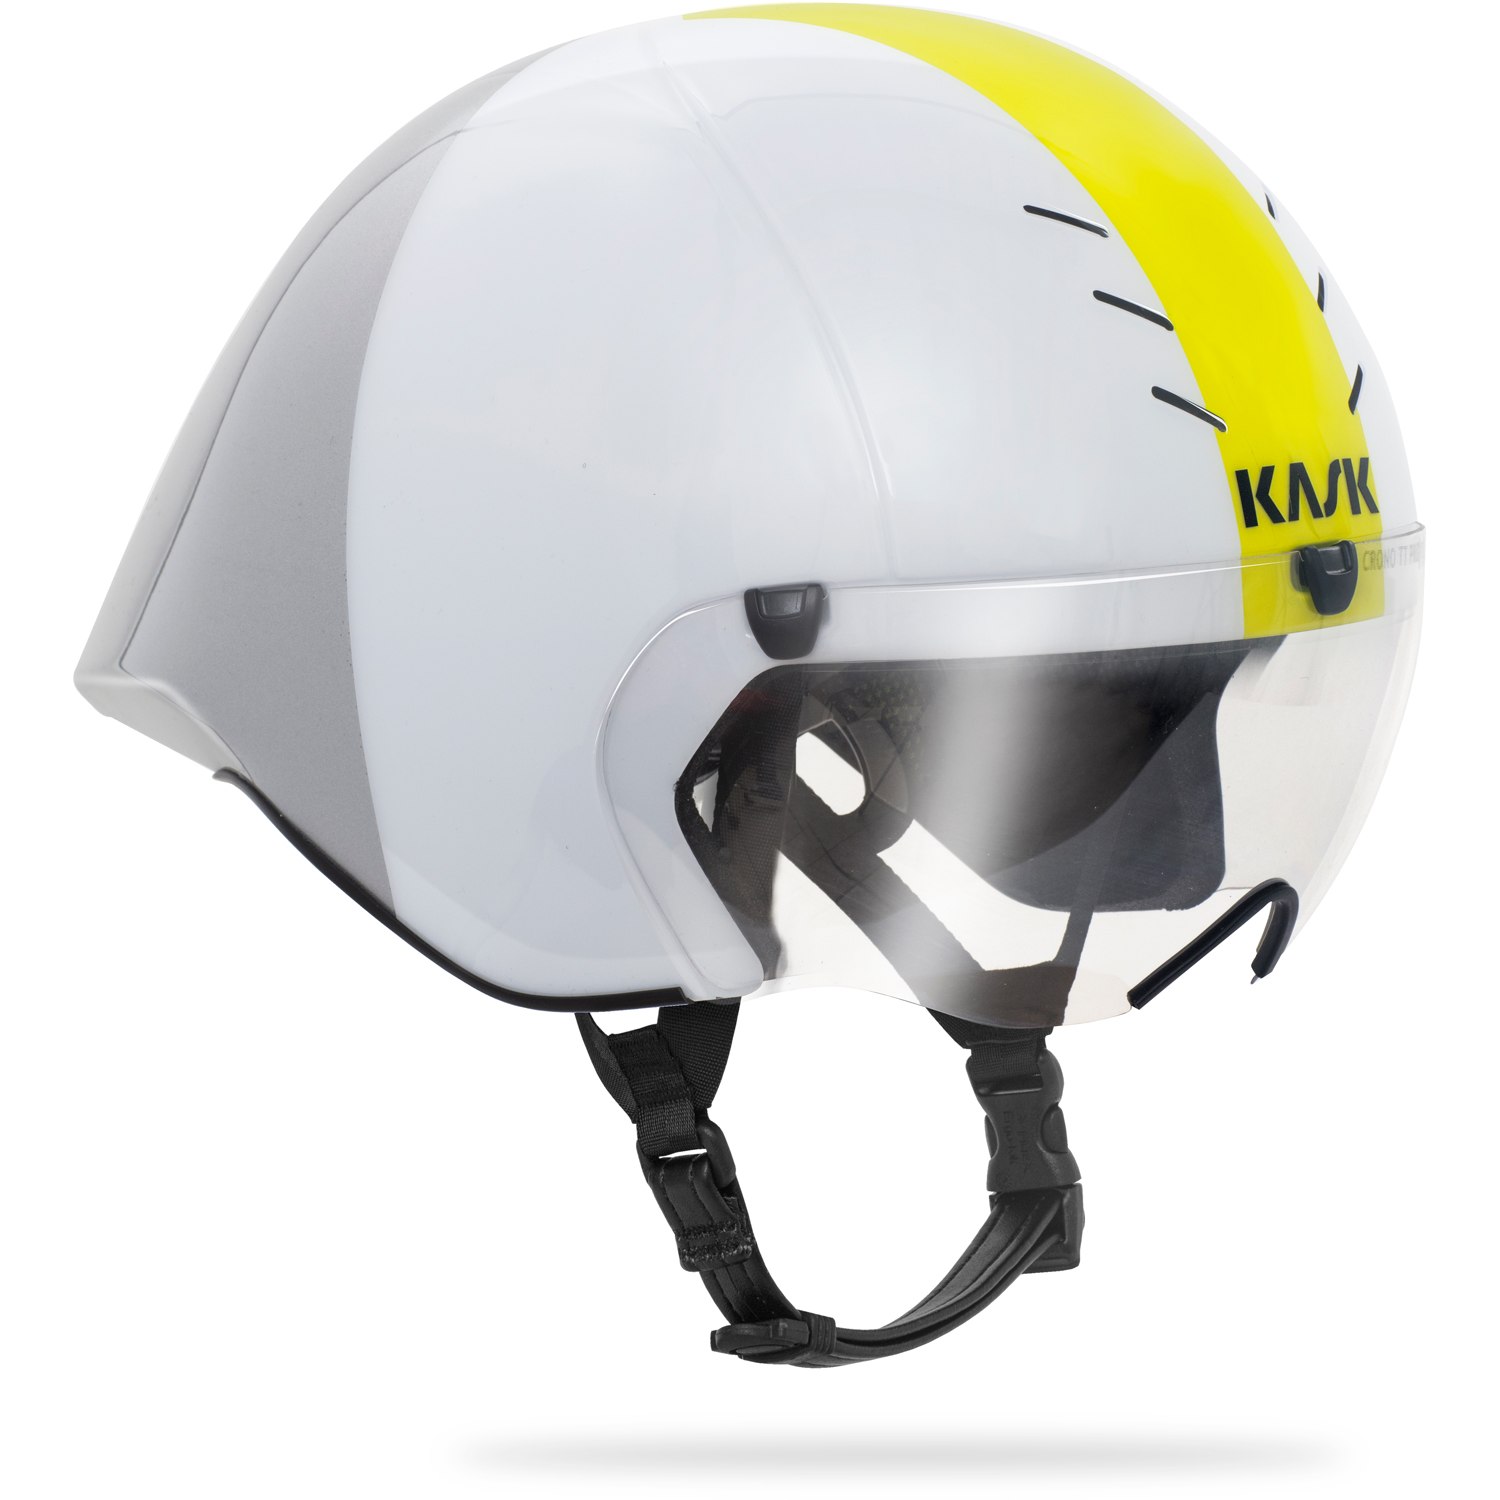 Picture of KASK Mistral Trial Helmet - White/Silver